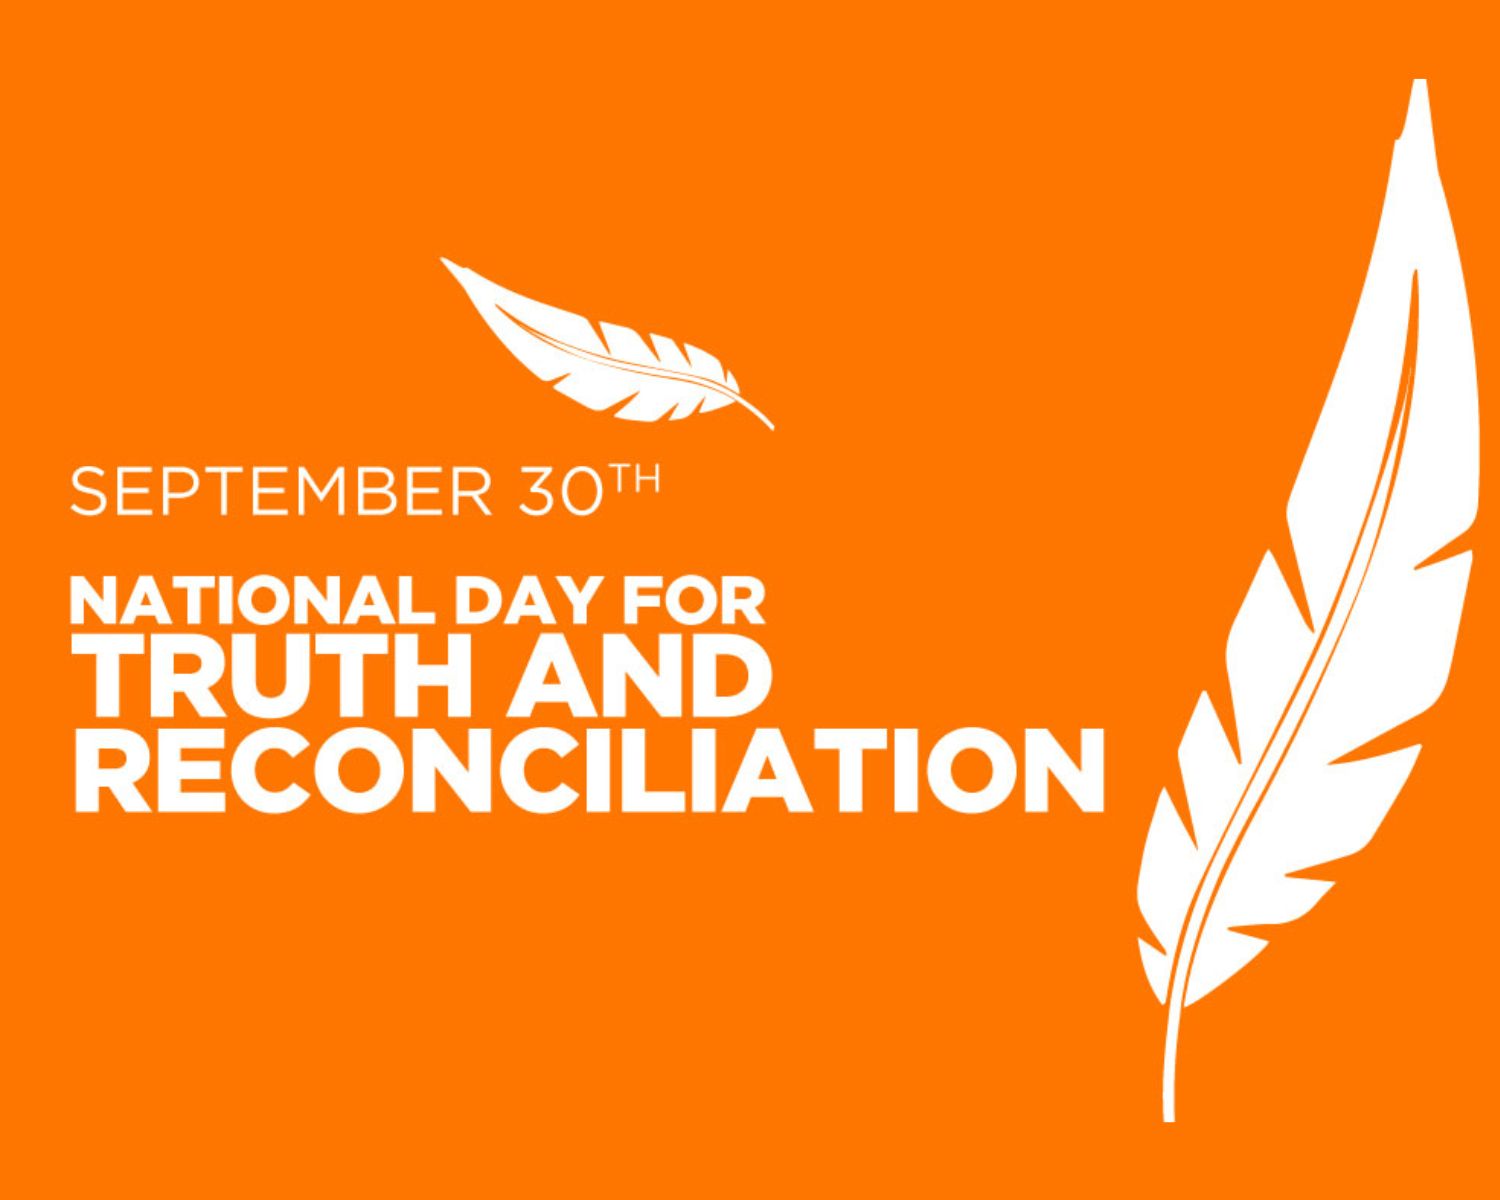 Graphic has orange background and the words "September 30th - National Day for Truth and Reconciliation" with two feathers in the background